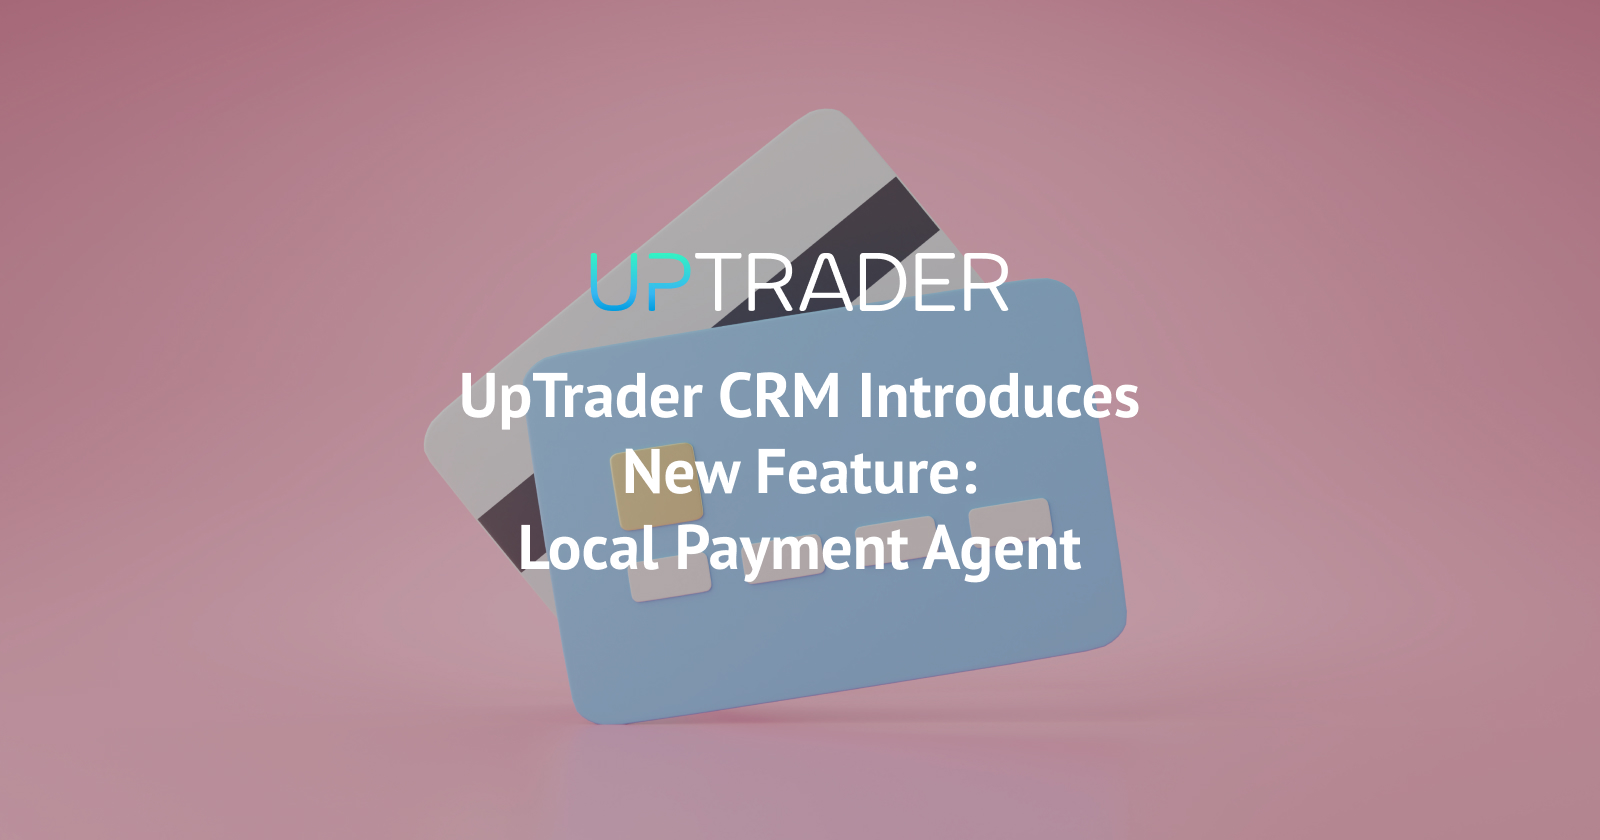 UpTrader CRM Introduces New Feature: Local Payment Agent